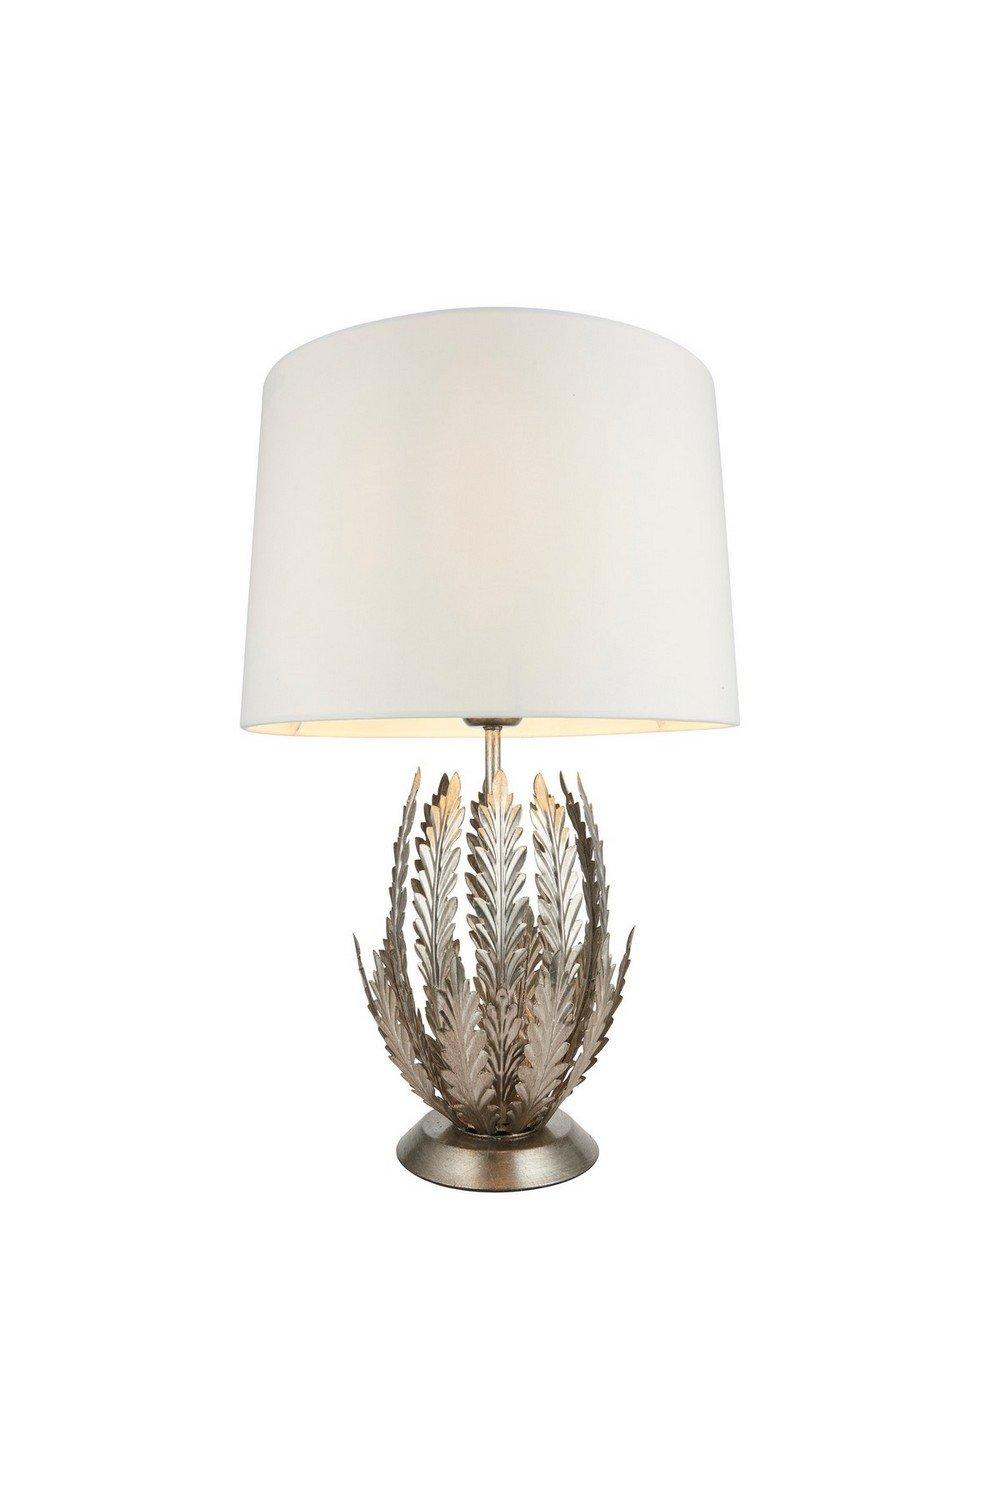 Delphine Decorative Silver Layered Leaf Table Lamp with Ivory Fabric Shades